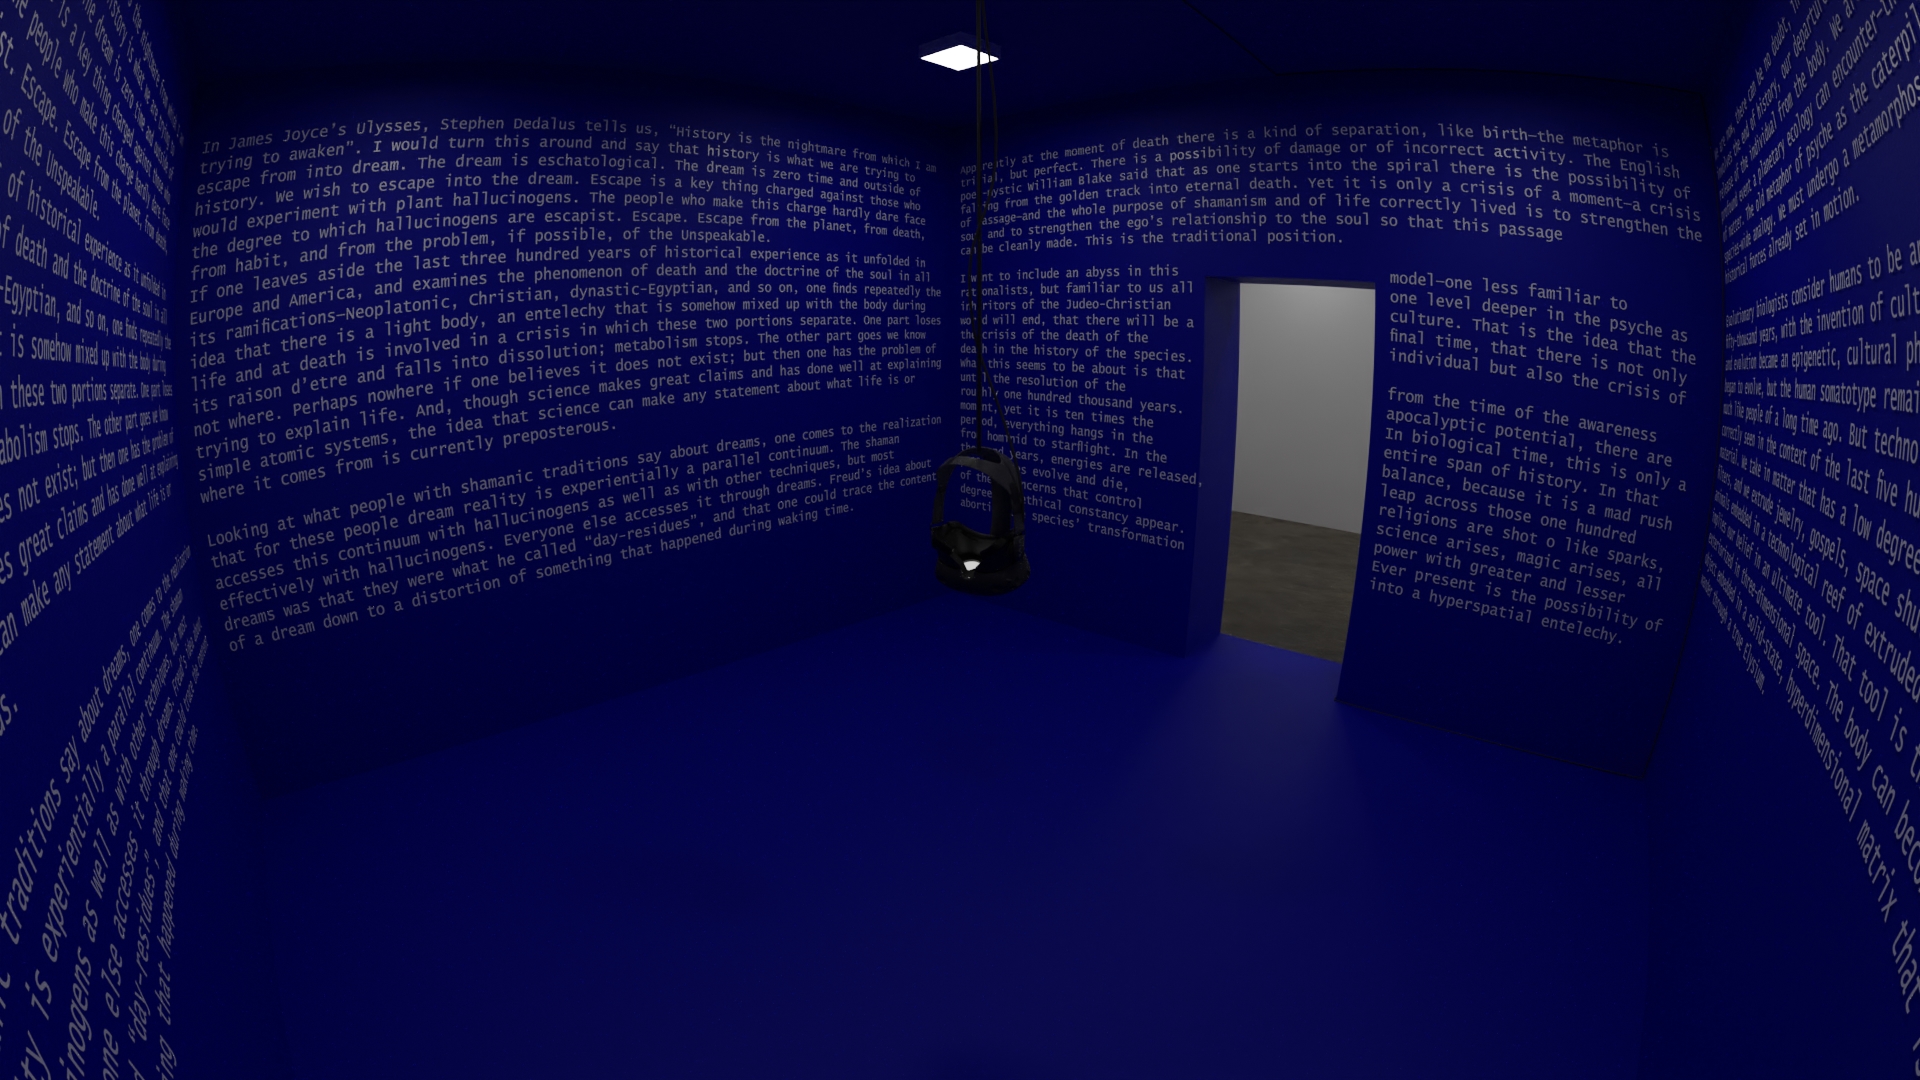 This is a blue room with text on the walls by the artist Doireann O'malley